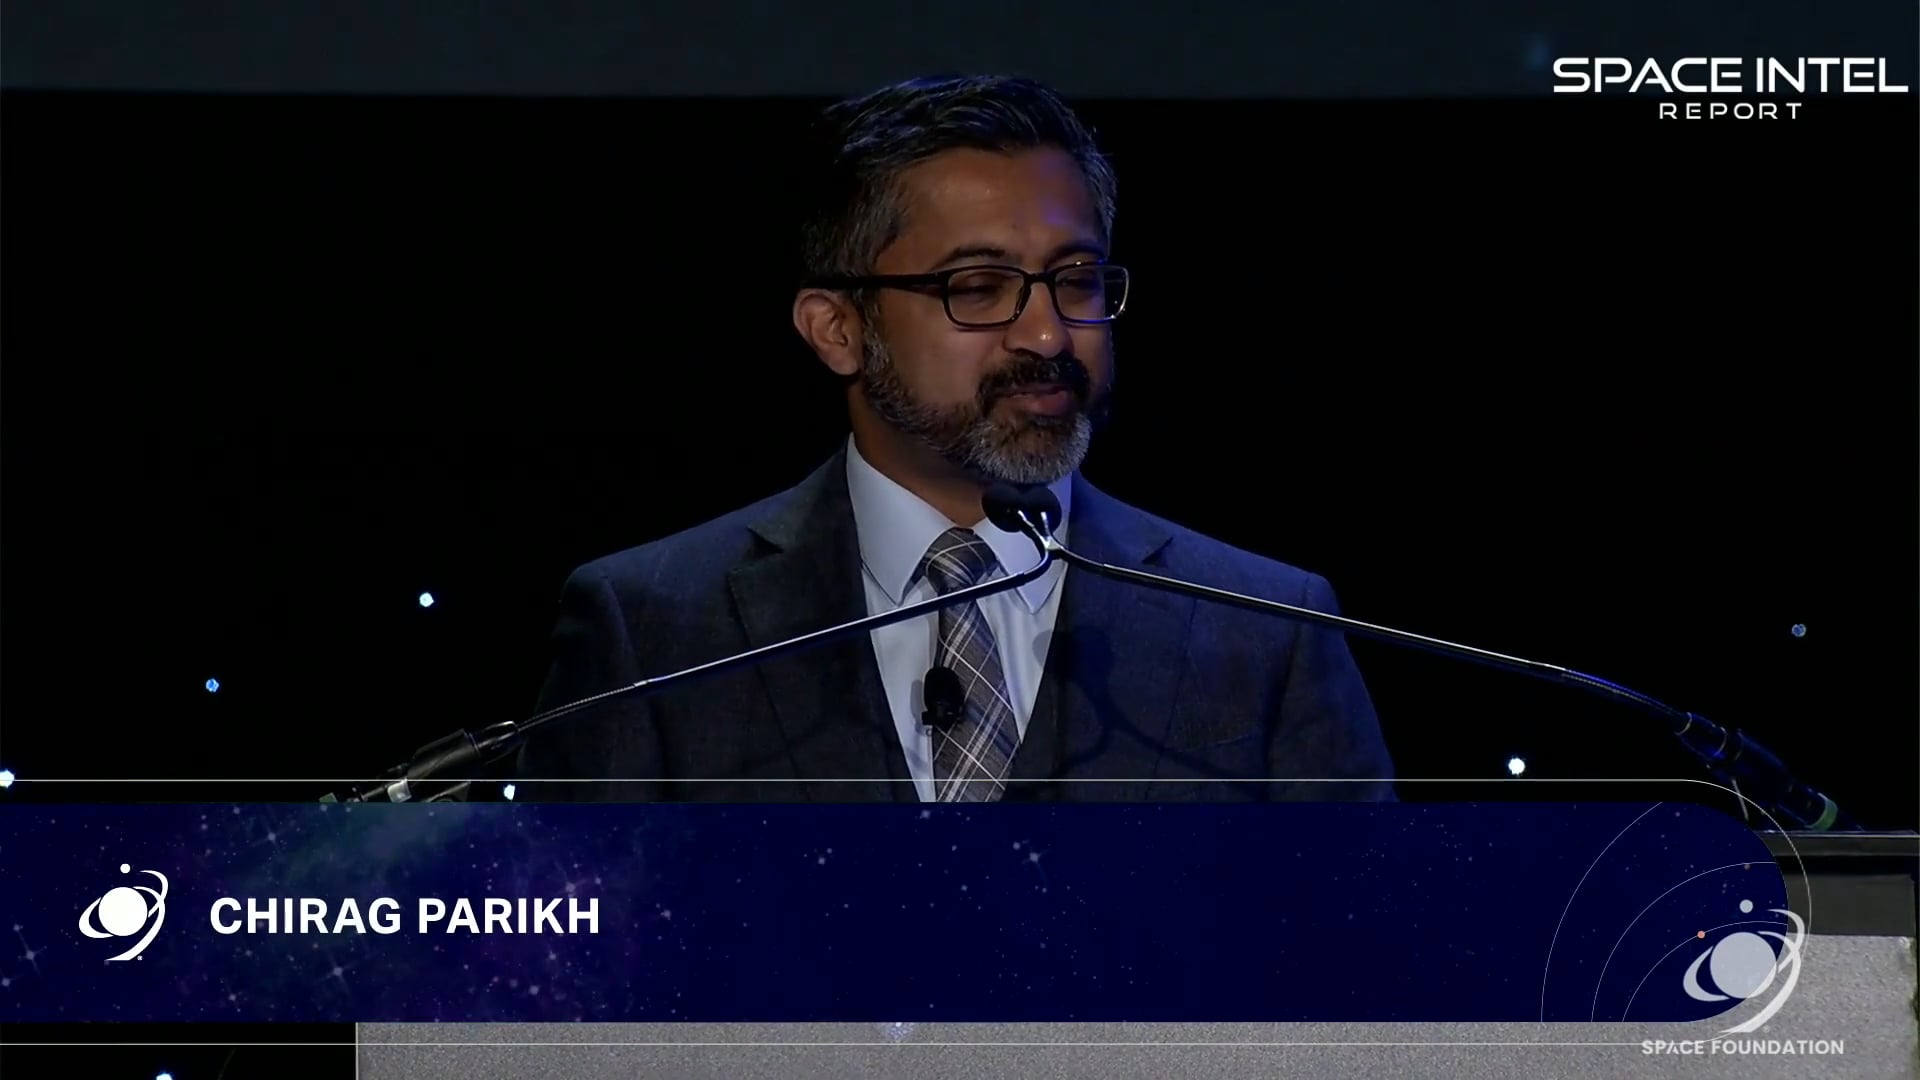 International collaboration will be key for humankind’s efforts in space, Chirag Parikh, executive secretary of the U.S. National Space Council, told an audience at the 39th Space Symposium.